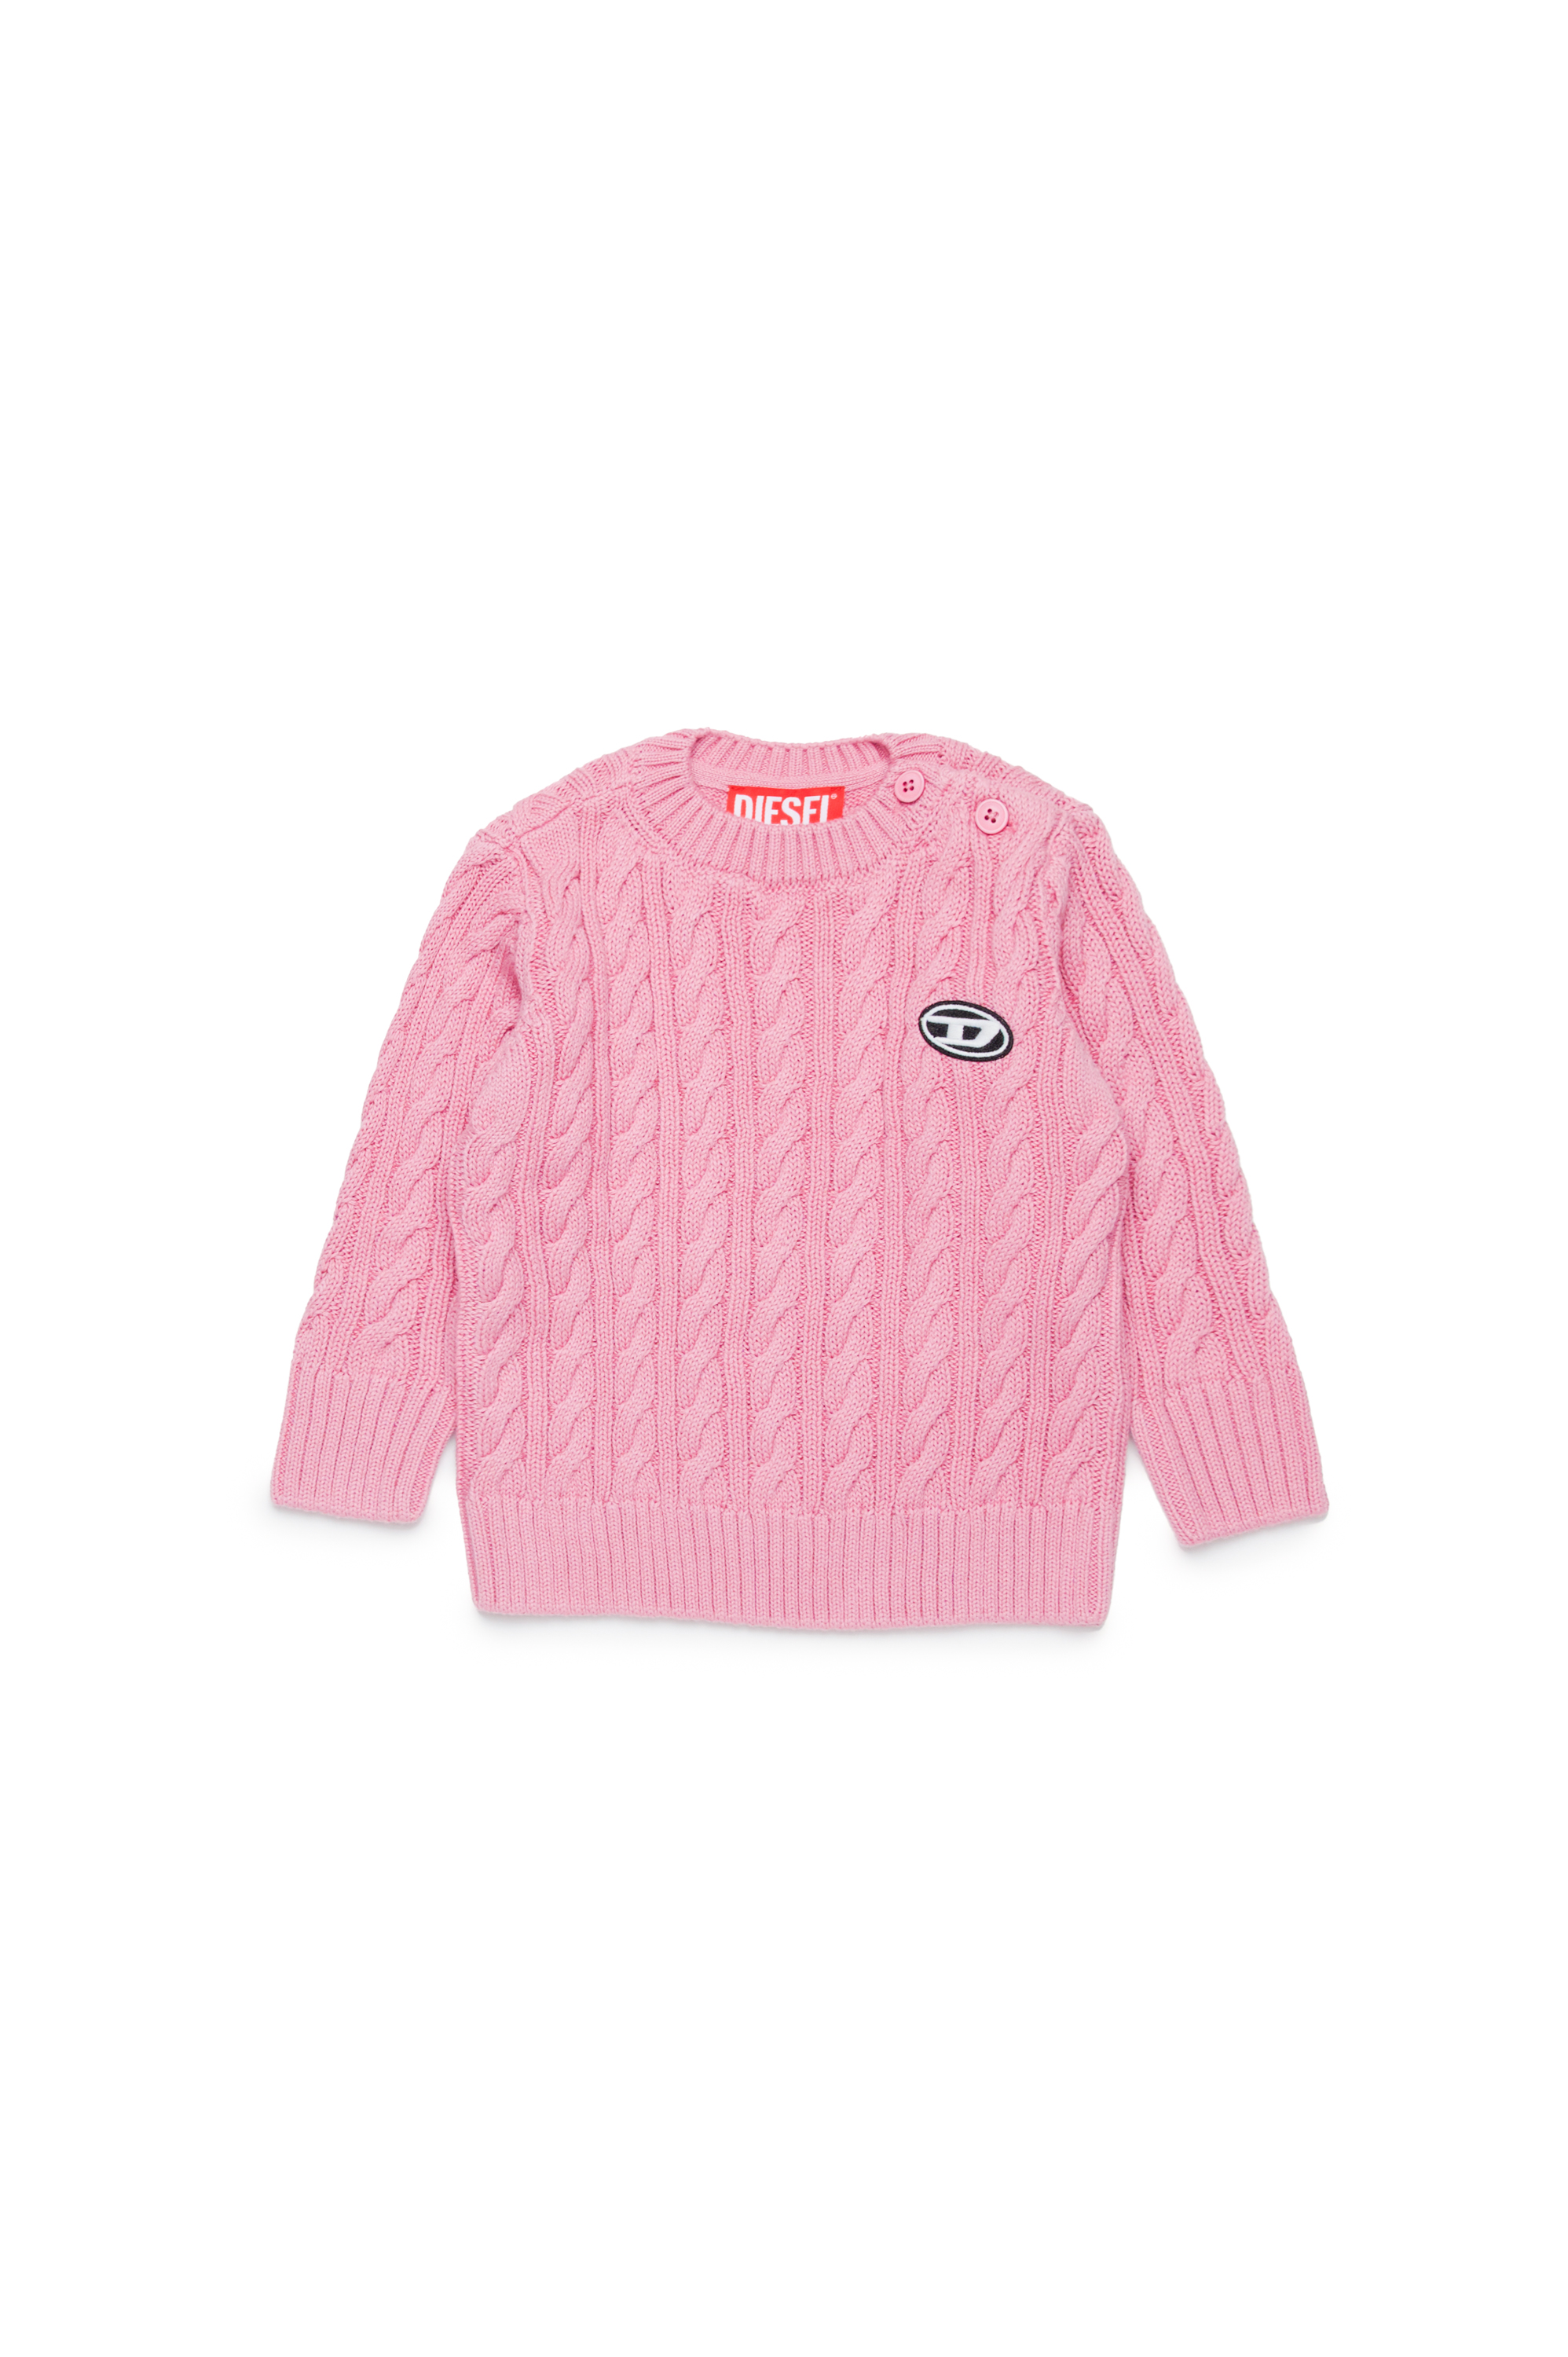 Diesel - KBAMBYB, Unisex Pullover in cotone con patch Oval D in Rosa - Image 1